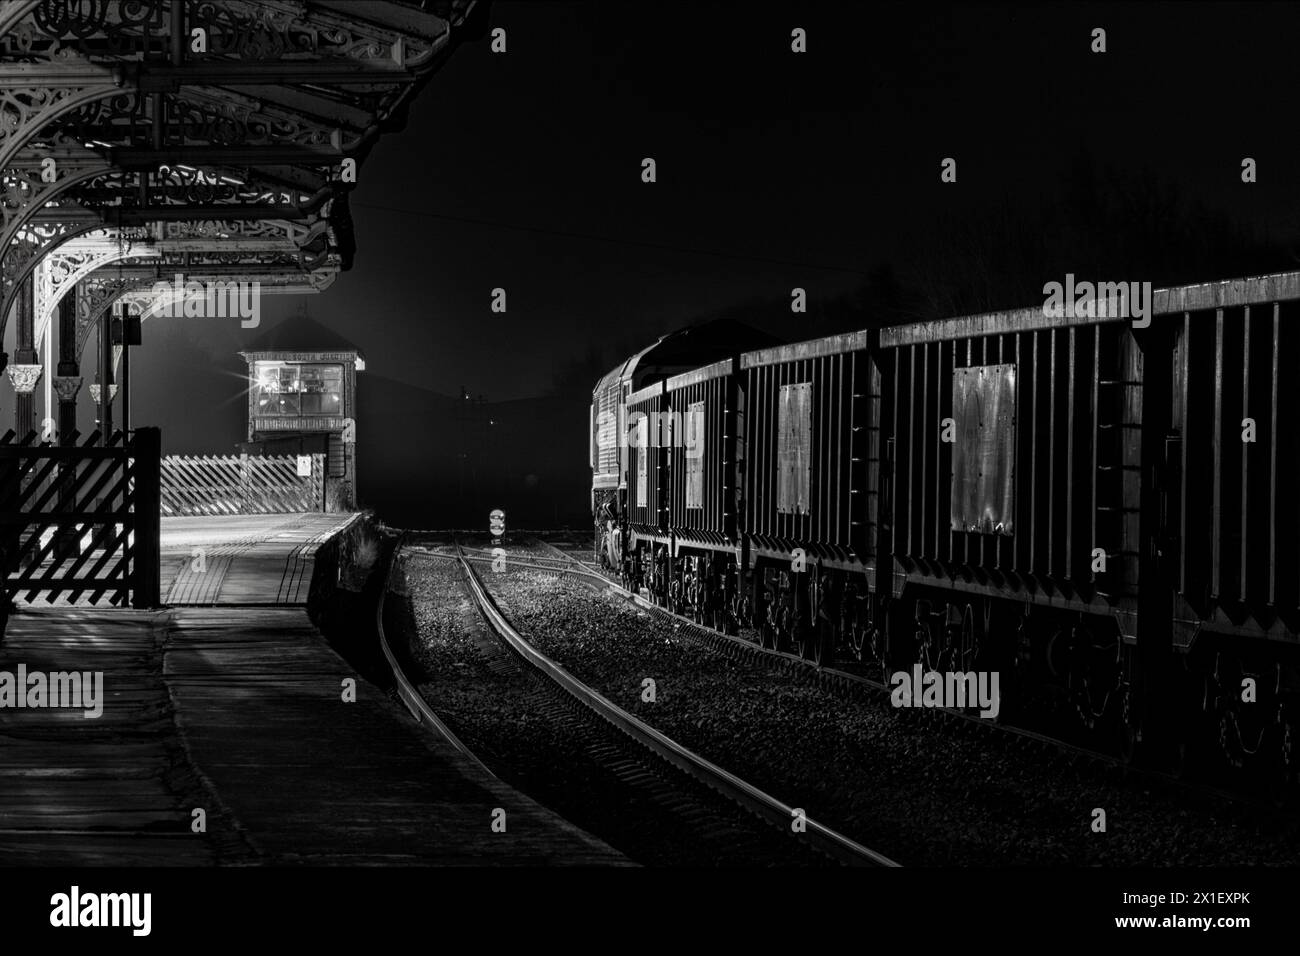 GB Rail Freight class 66 locomotive 66718 under the Midland Railway canopy at  Hellifield  railway station with a train carrying aggregates at night Stock Photo